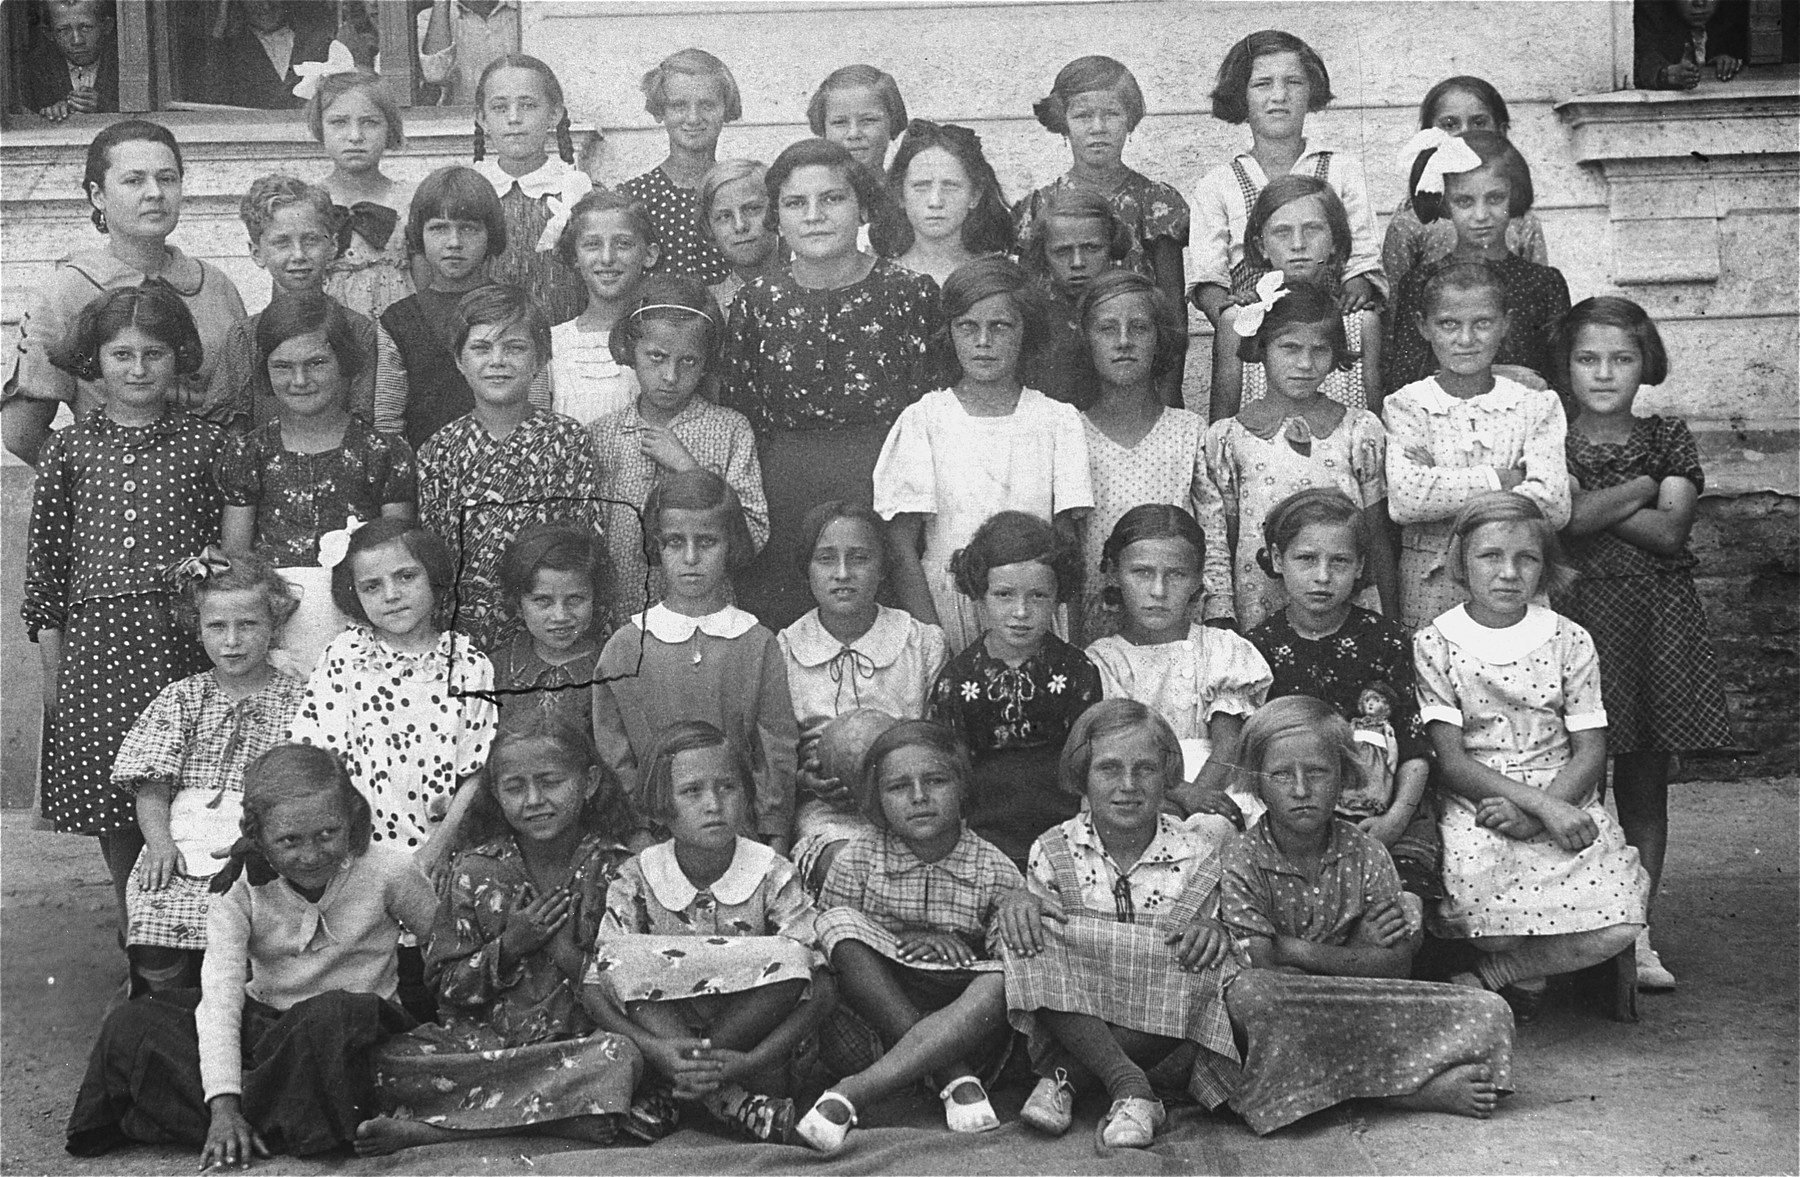 Group portrait of first grade students and teachers at a public school in Vinogradov, Ukraine.  

Among those pictured is 6-year-old Edith Rottenstein (second row, third from the left).  Edith survived the Auschwitz and Stutthof concentration camps.